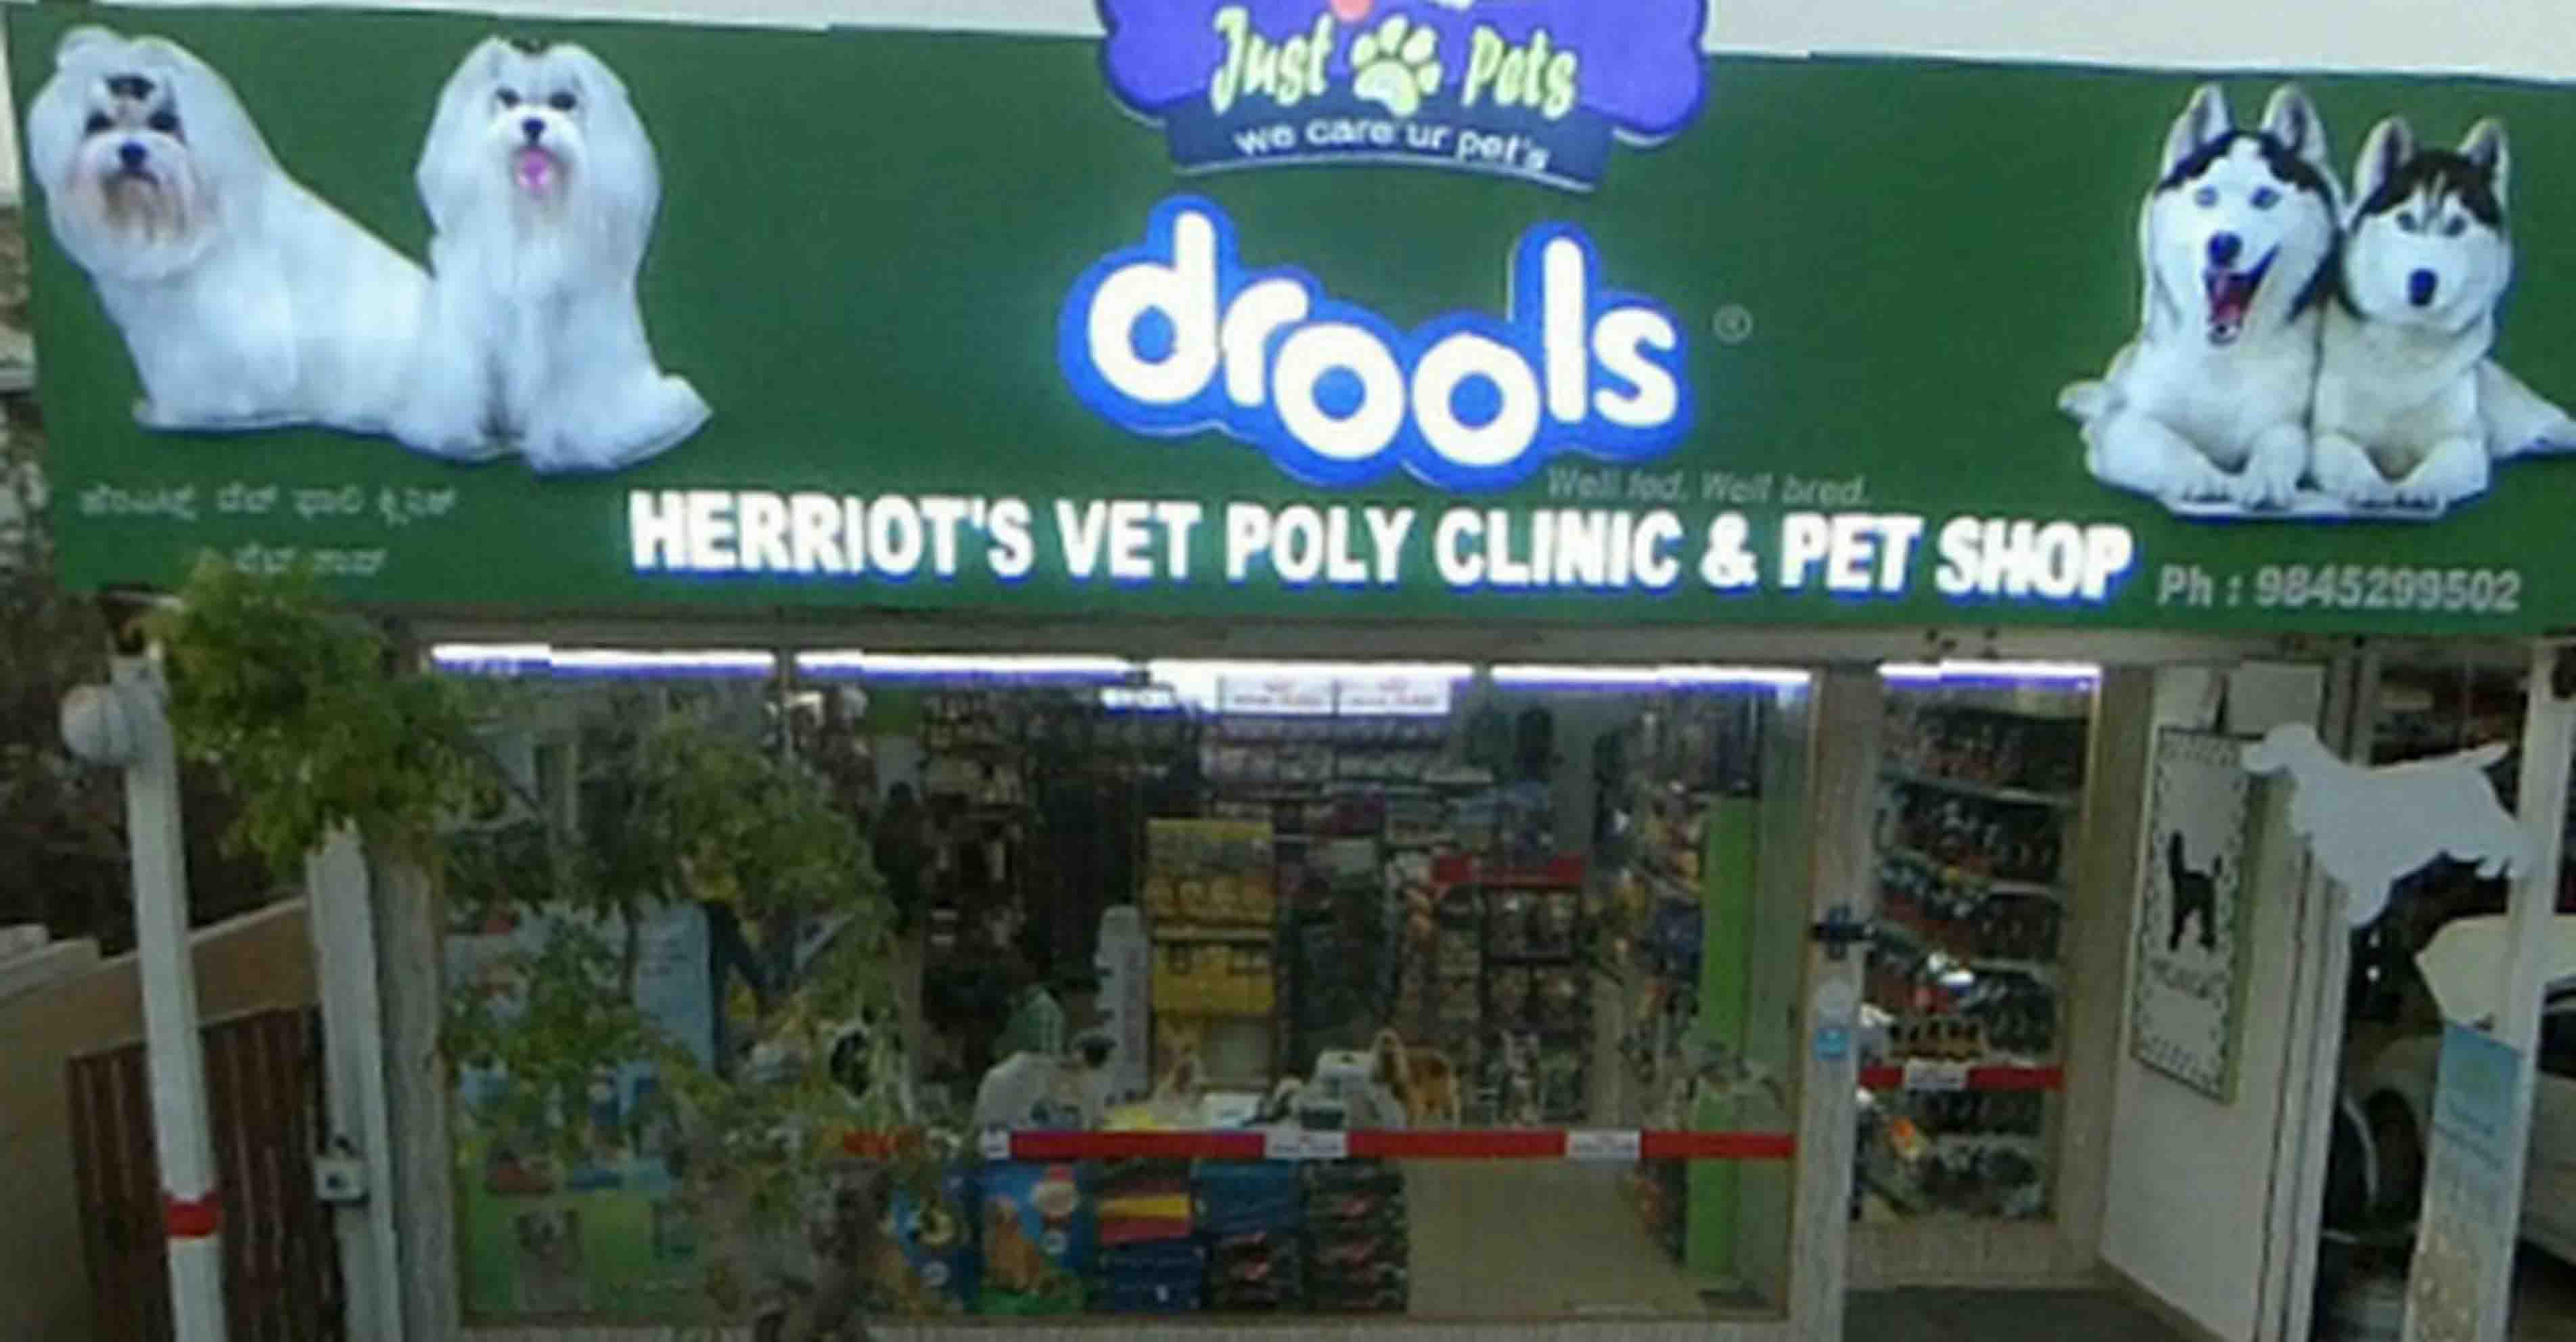 nearby dog stores